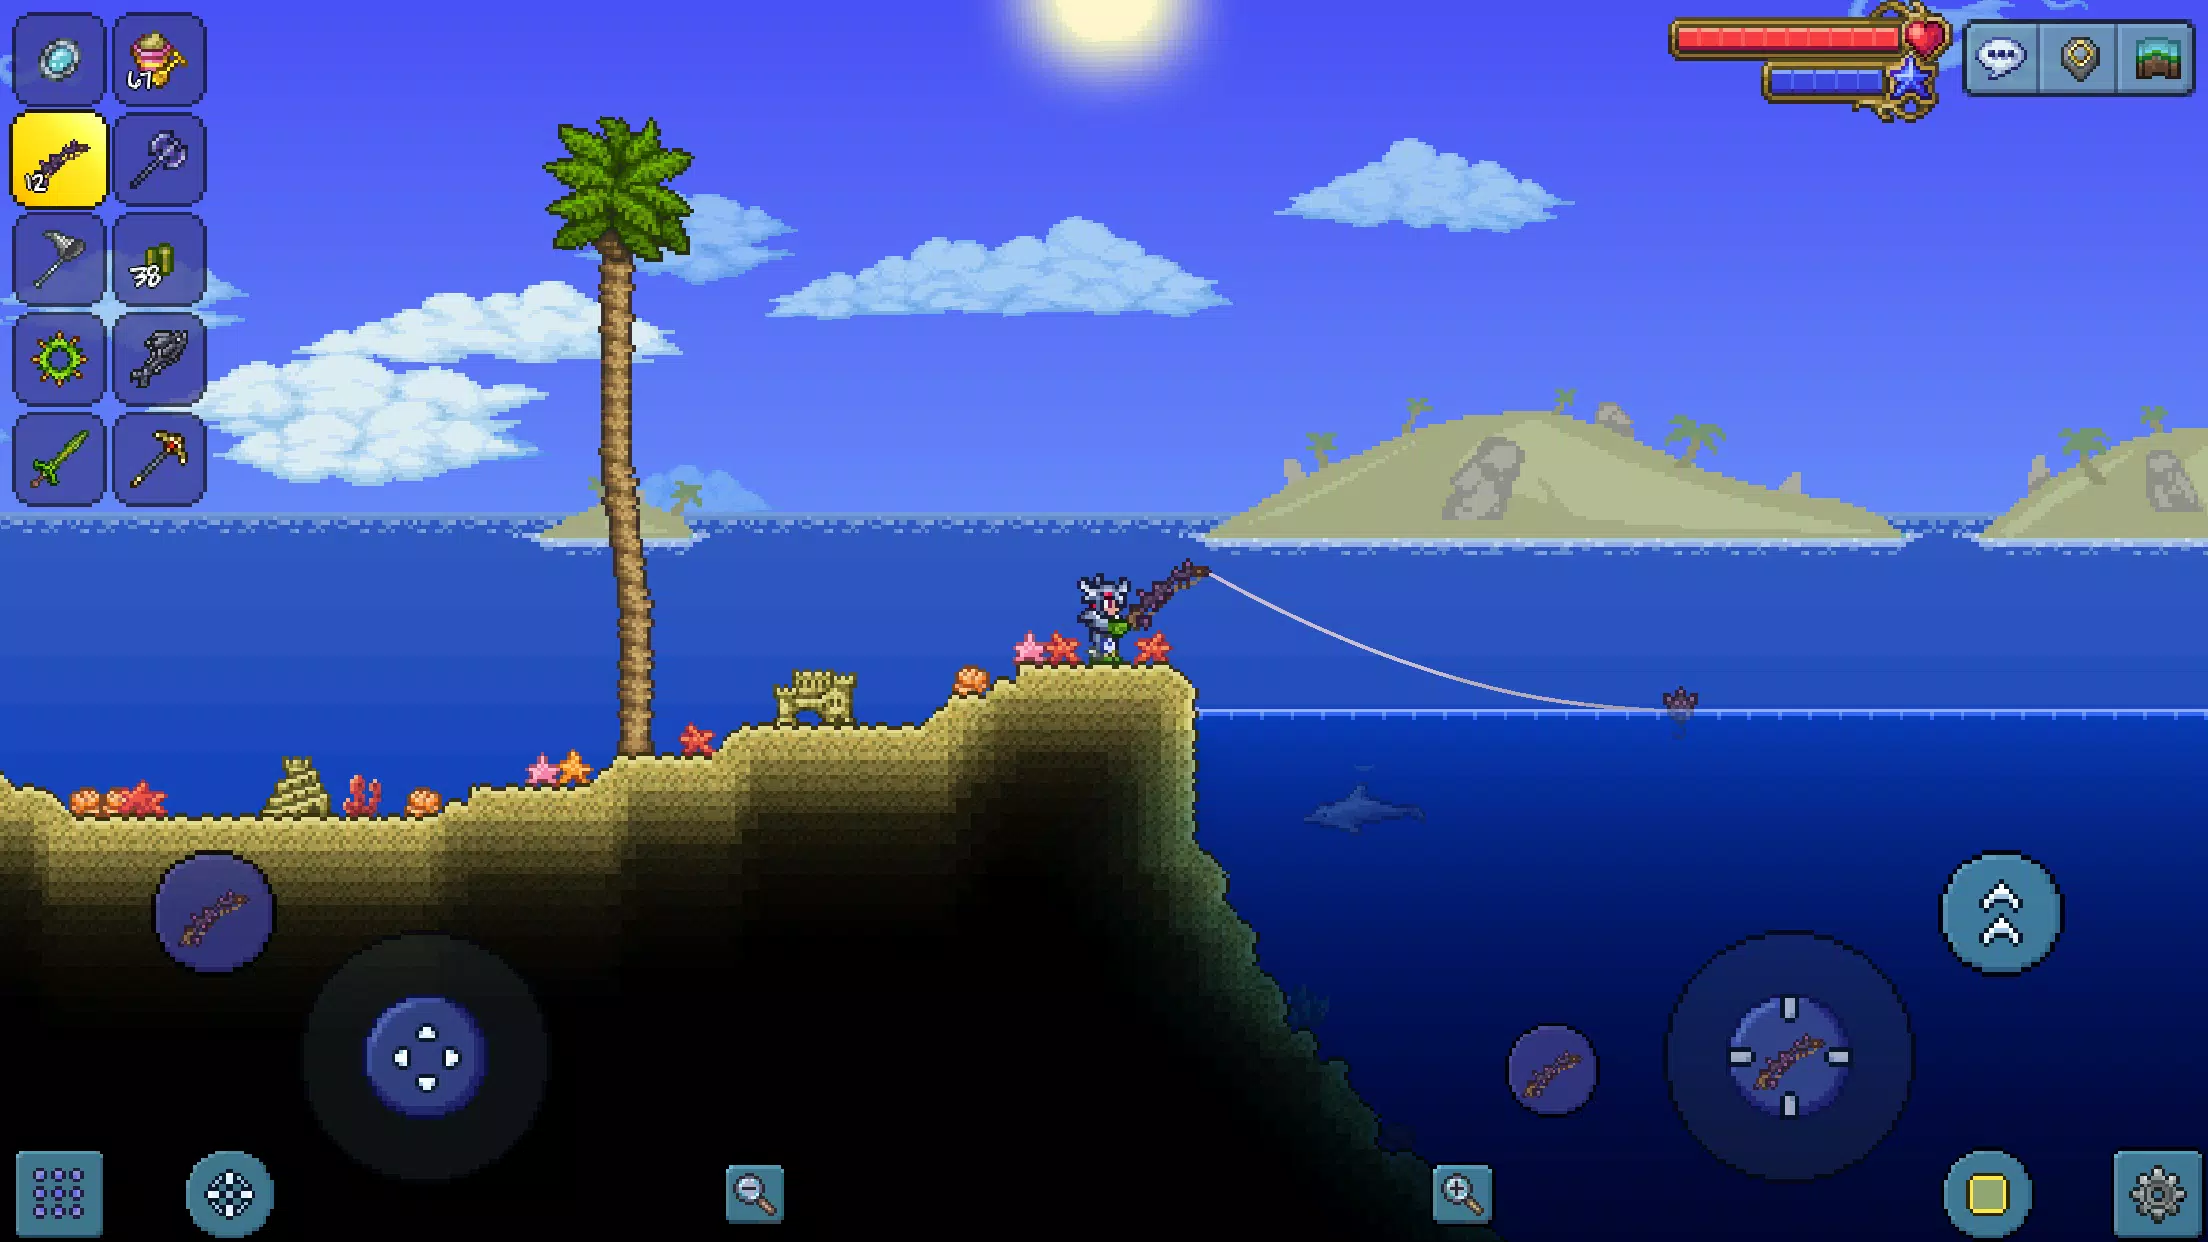 Terraria APK 1.4.4.9.5 free Download Latest version for Android